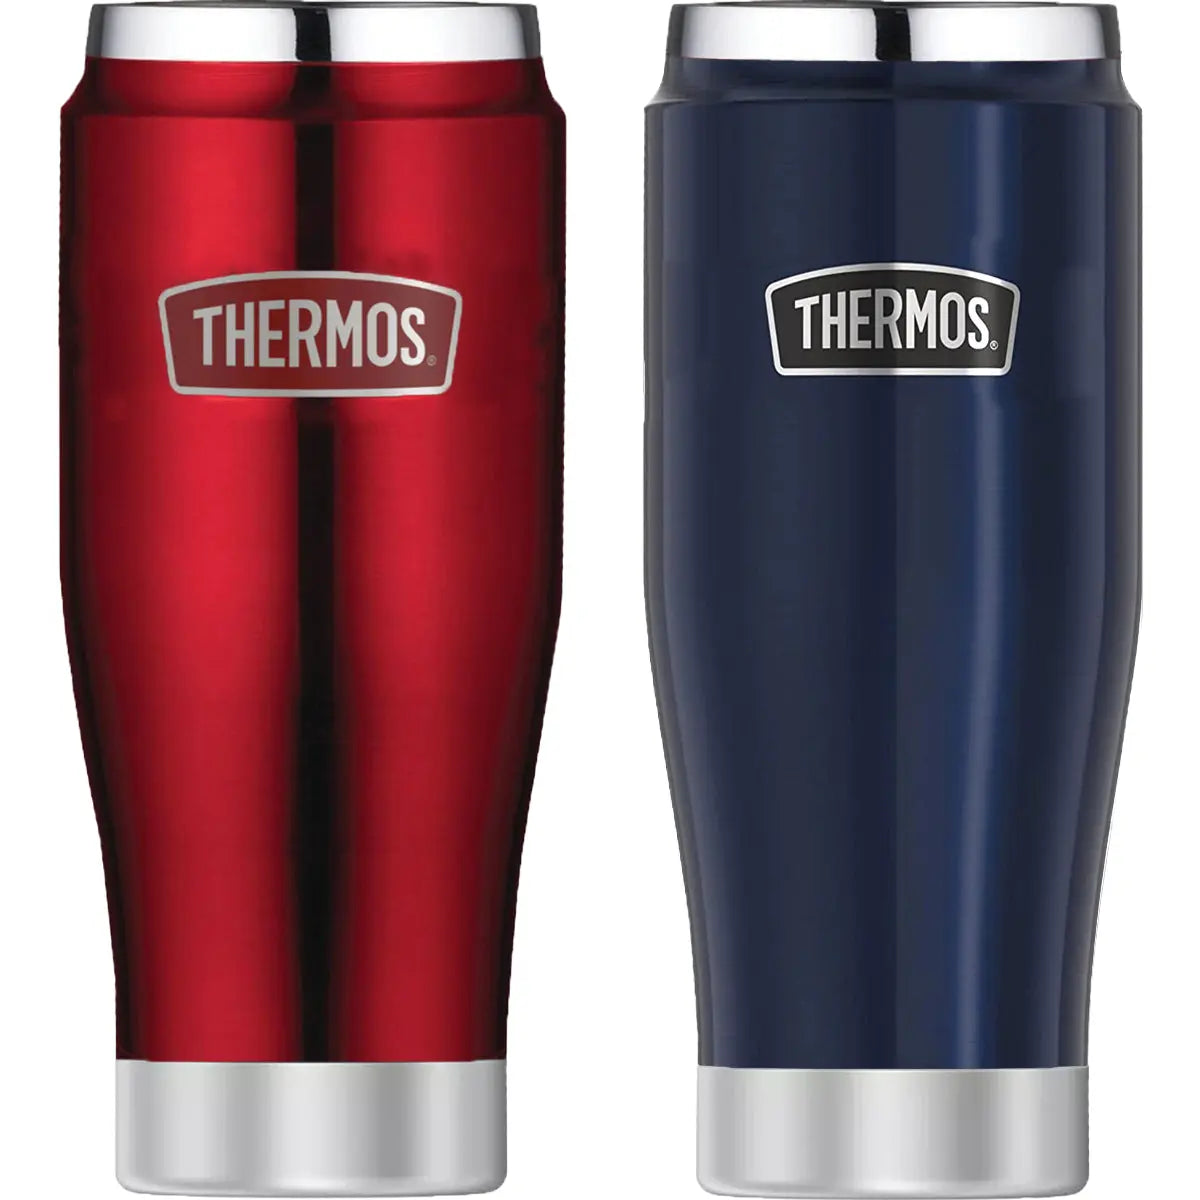 Thermos 16 oz. Stainless King Insulated Tumbler 2-Pack - Cranberry/Midnight Blue Thermos